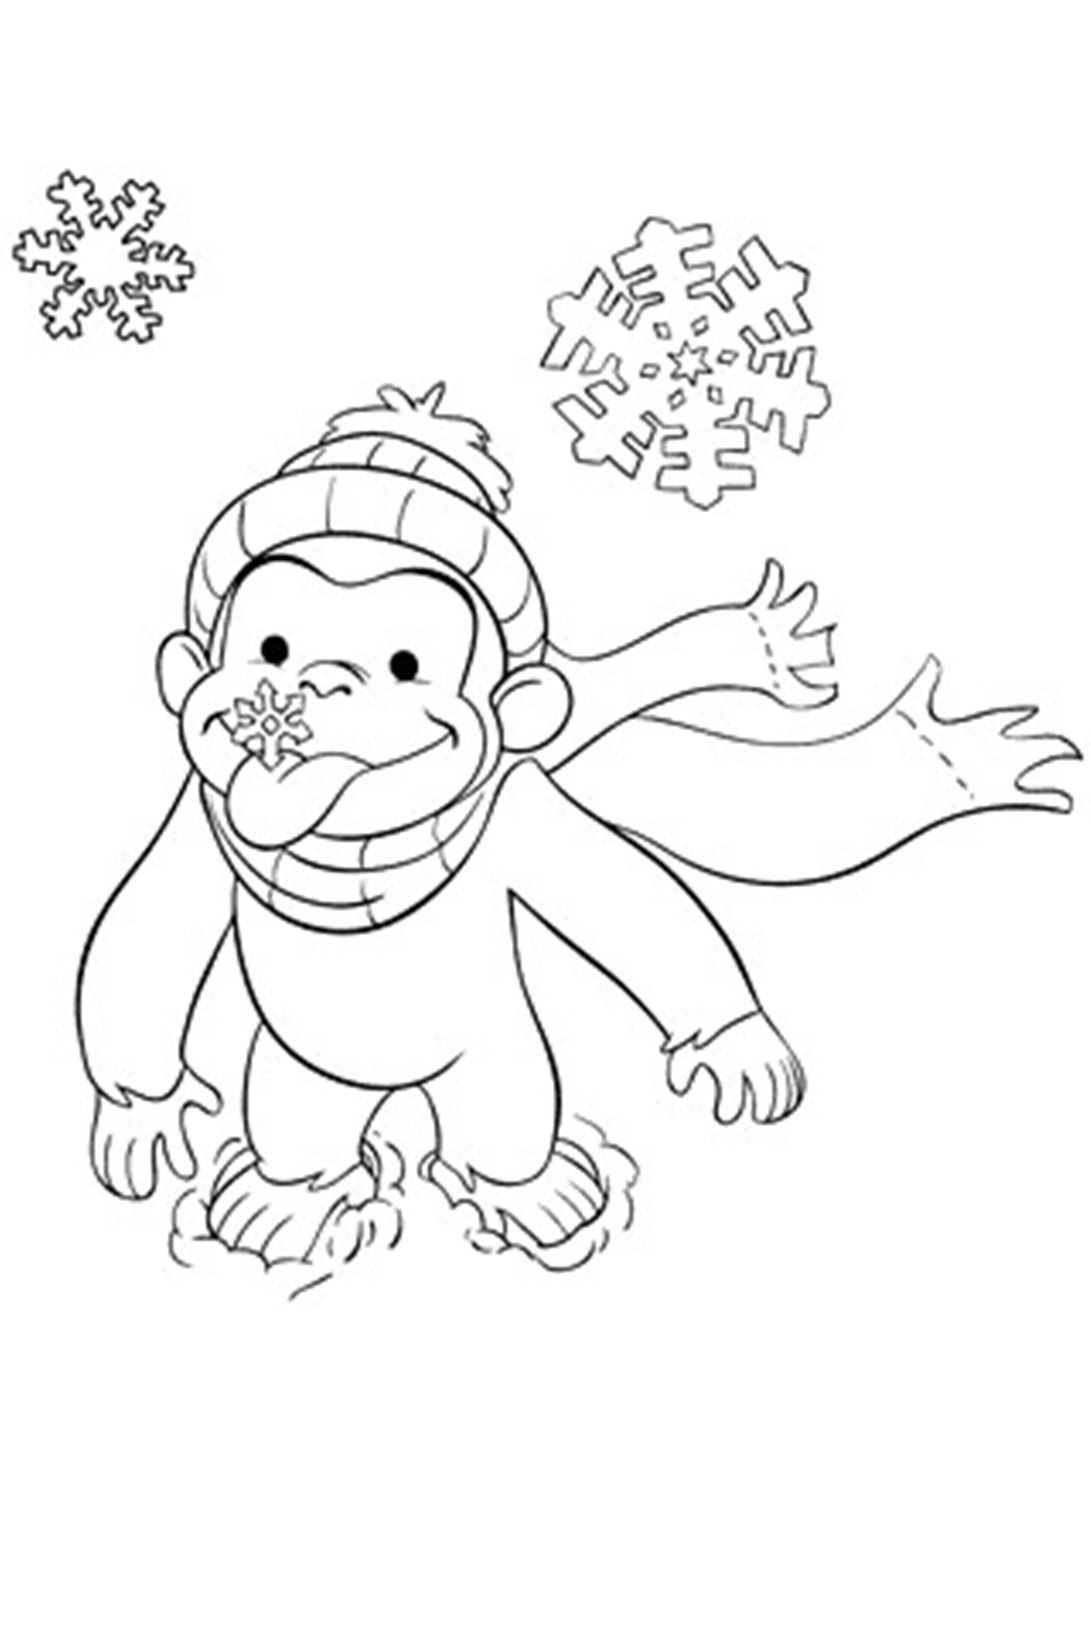 Printable Toddler Coloring Pages
 What a great winter scene to color for Curious George